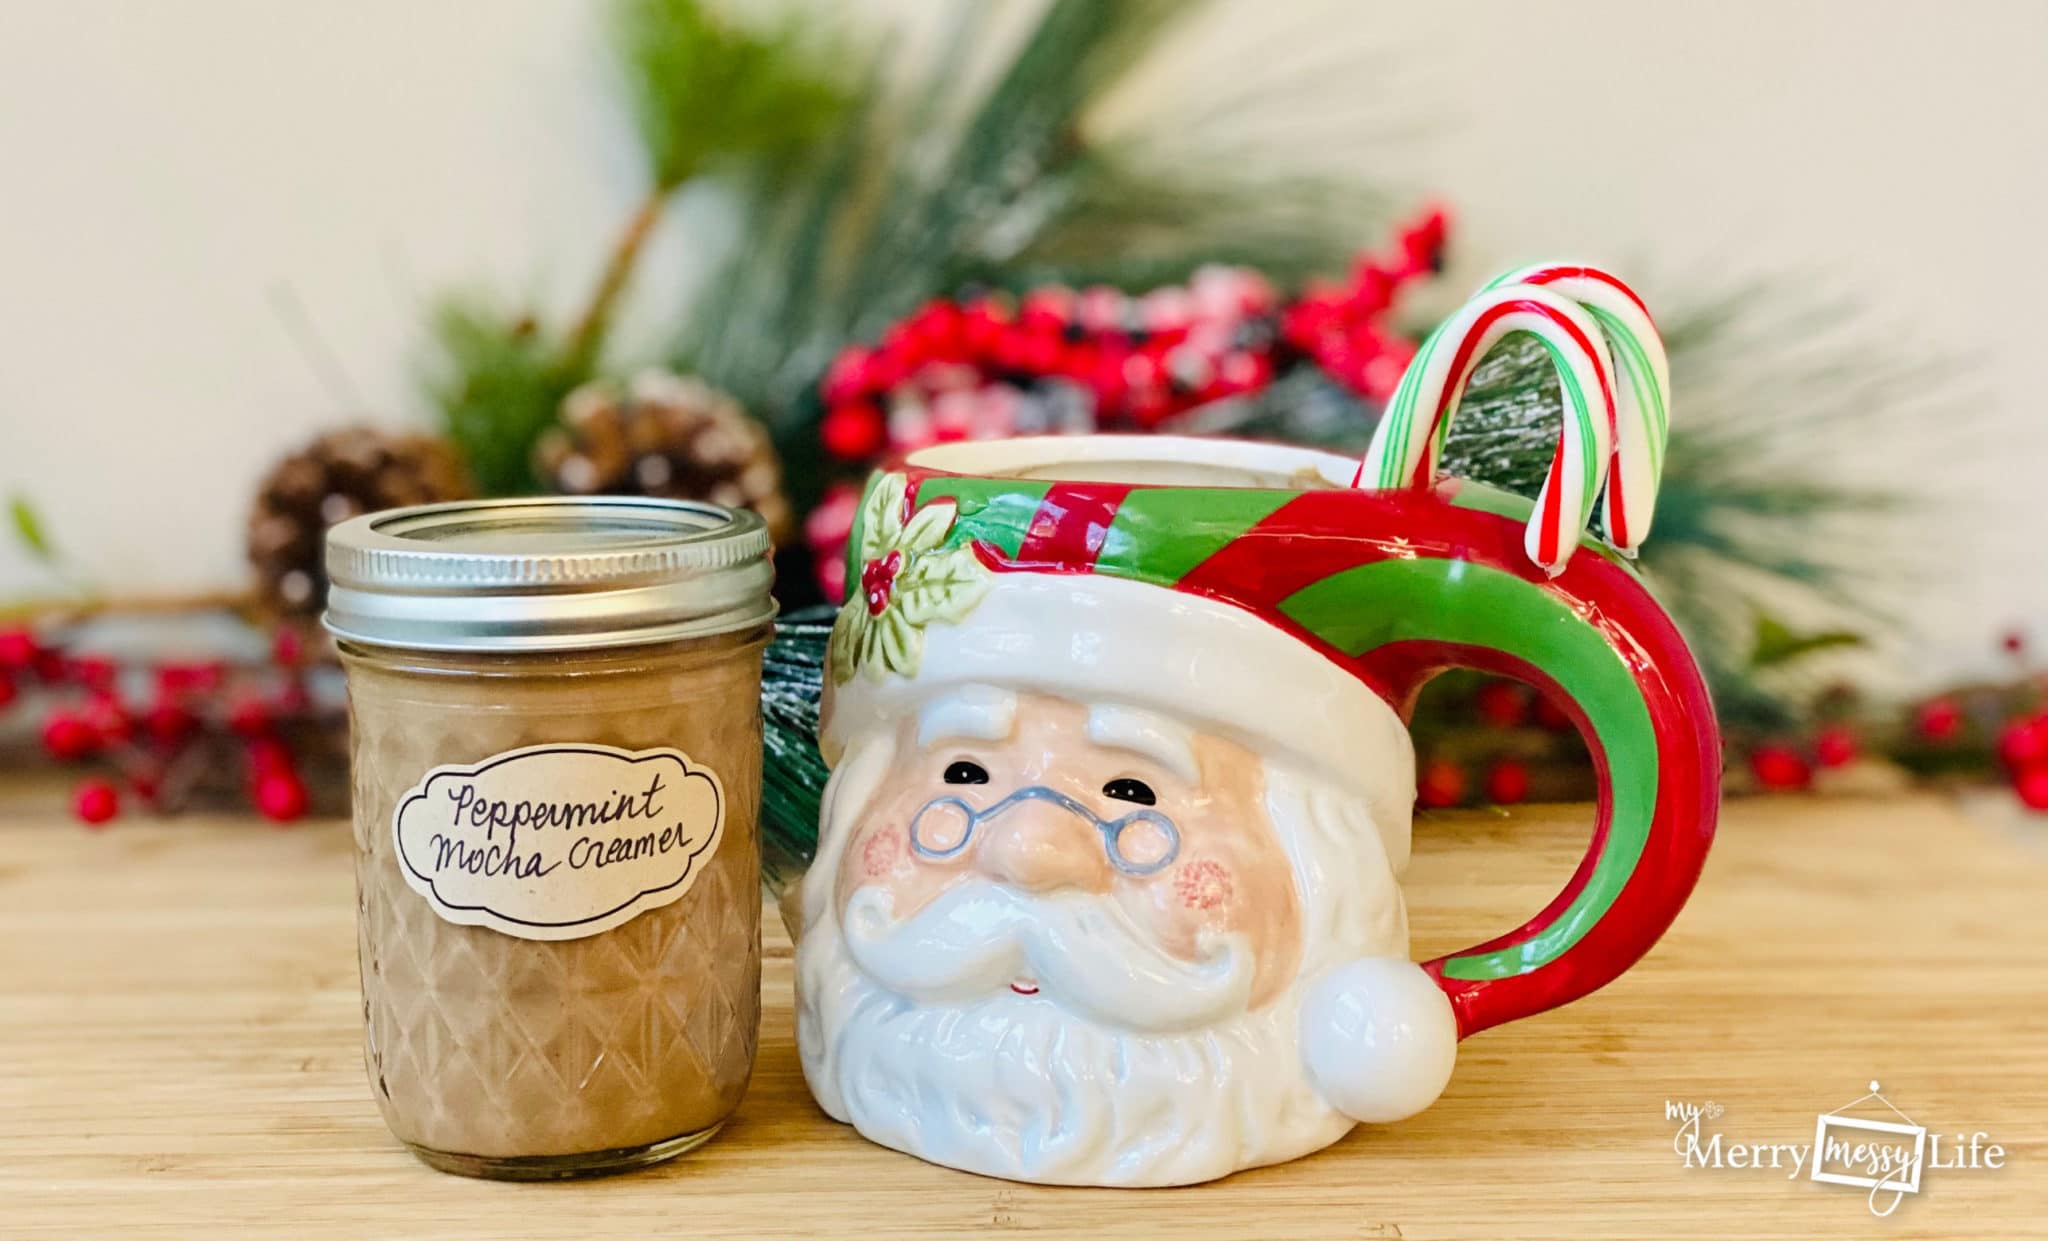 Healthy Peppermint Mocha Creamer Recipe for Christmas and the Holidays using real, natural ingredients